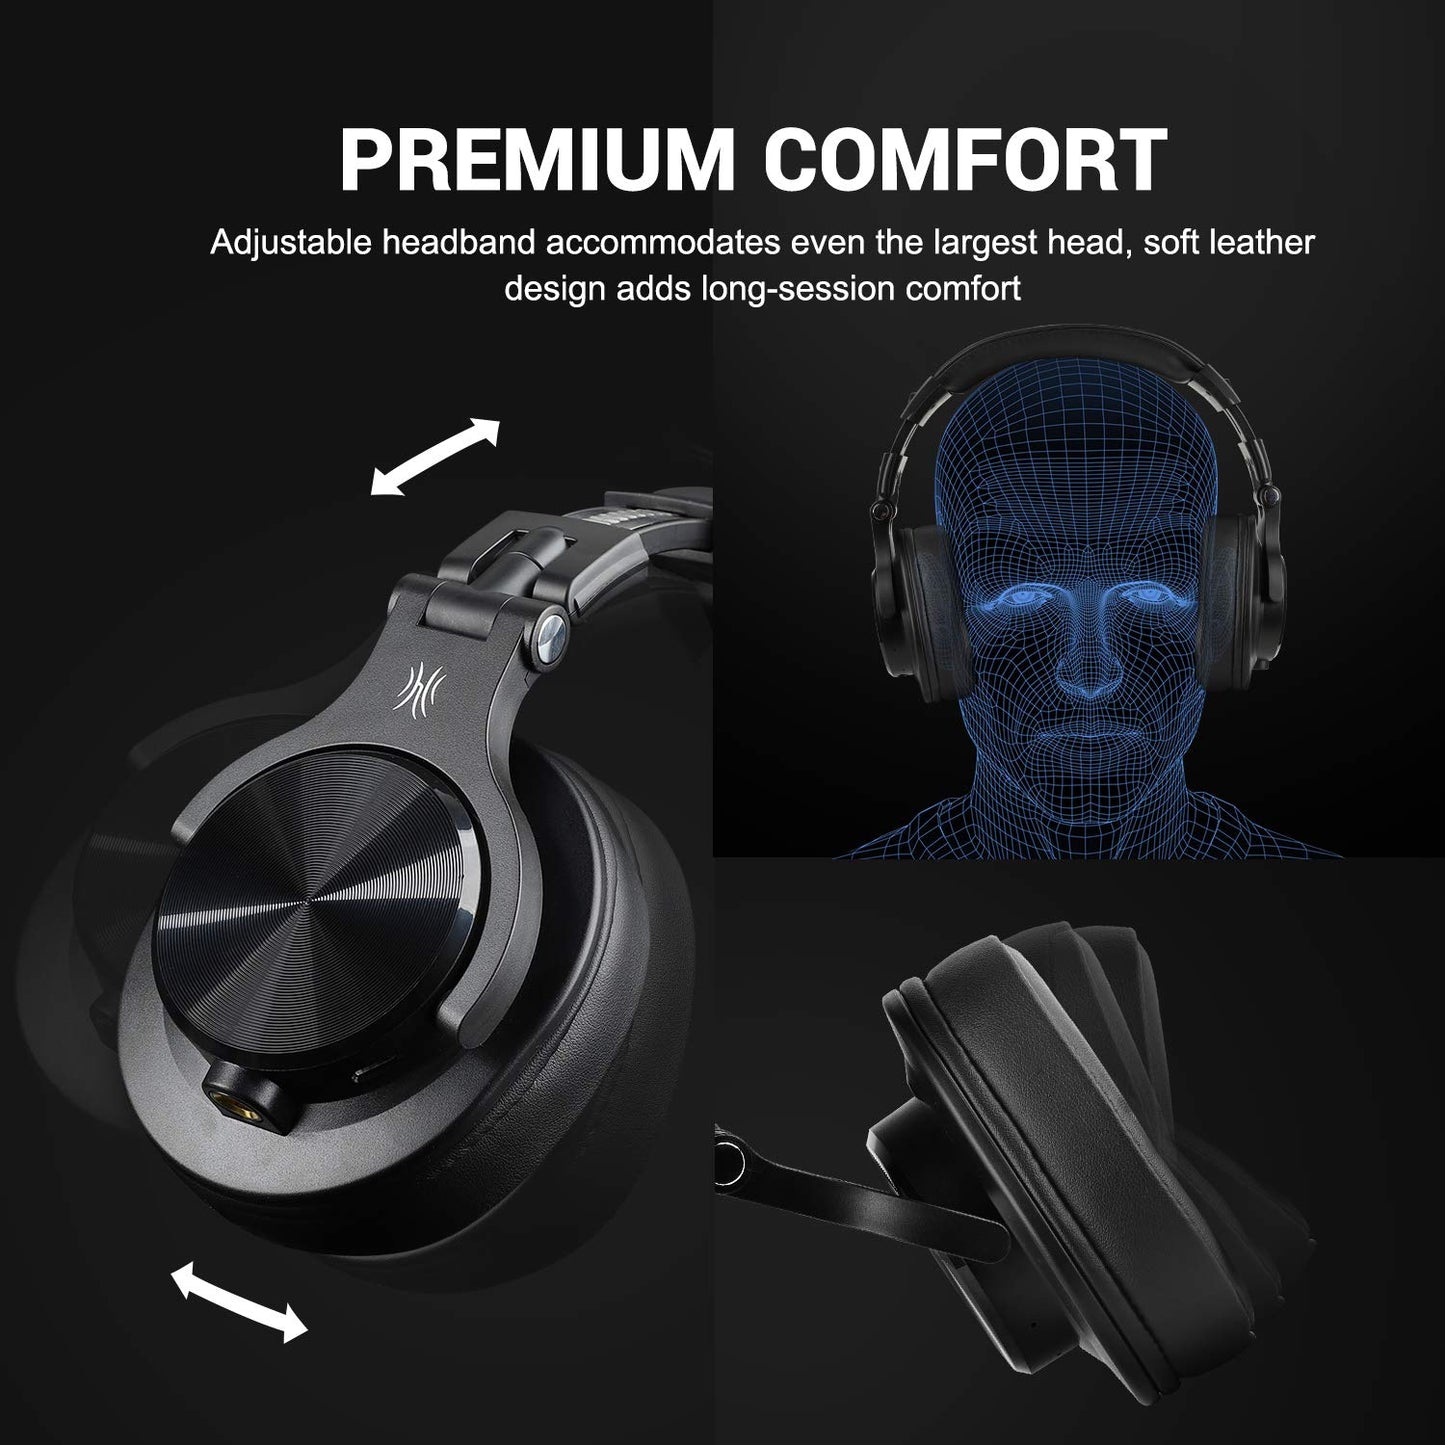 OneOdio Pro M Wireless Gaming Noise Cancelling Headphones (Over The Ear Headphones with Mic, 30 Hours Battery Life) Foldable Ergonomic Design